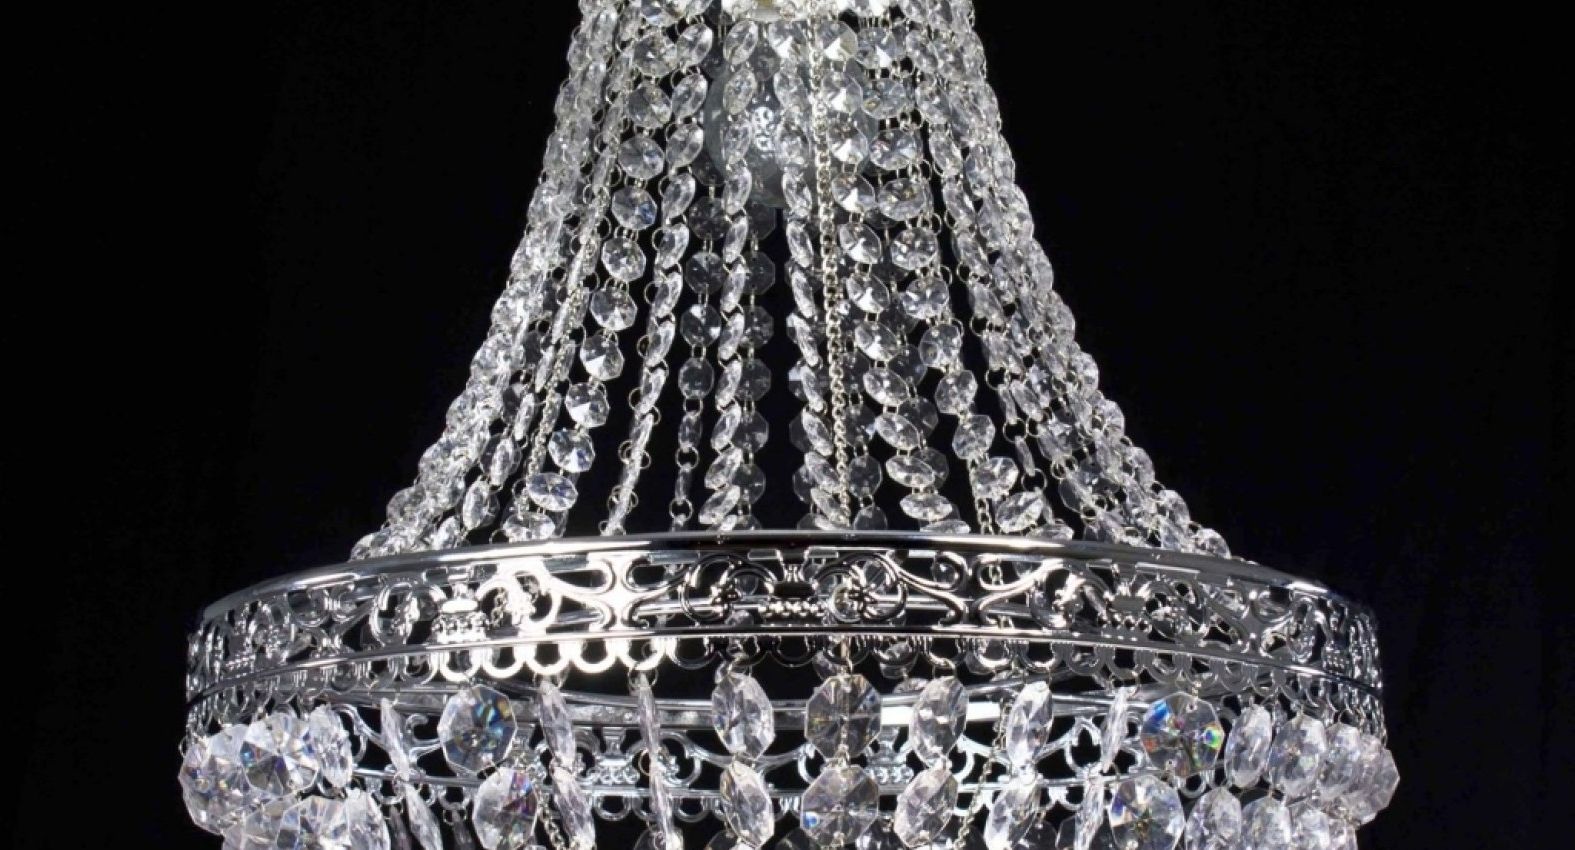 Well Known Chandeliers Design : Amazing Luxurious Chandeliers Crystals Stunning Within Expensive Crystal Chandeliers (View 19 of 20)